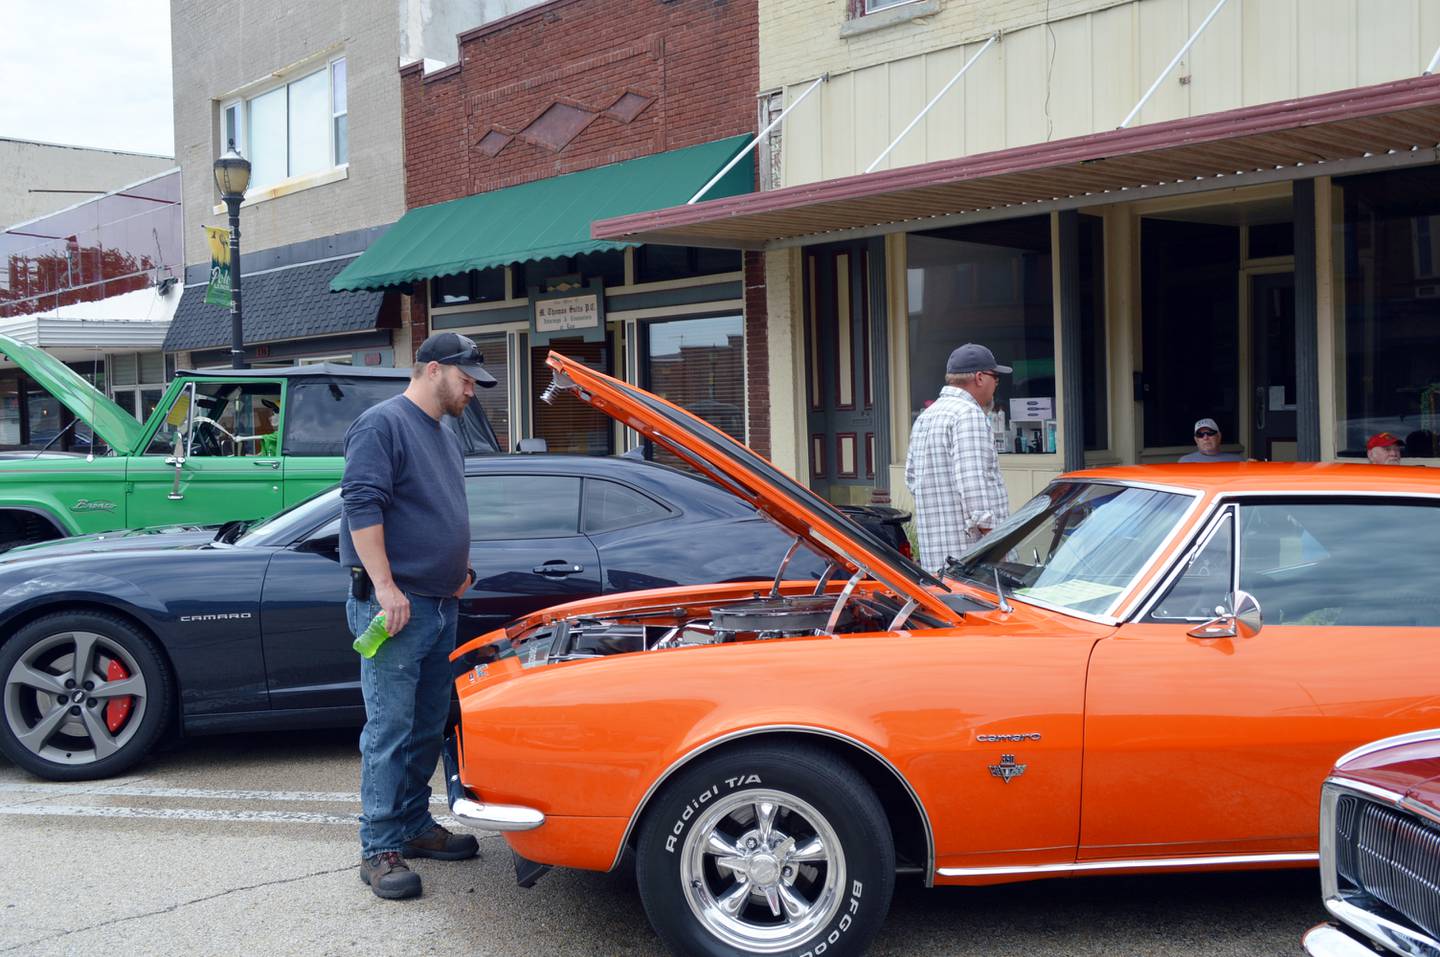 Steve Proper, of Sterling, looks at a 1967 Chevrolet Camaro, owned by Connie Rainowski, of Rock Falls, at the 33rd Annual Polo Car Show on Aug. 13.